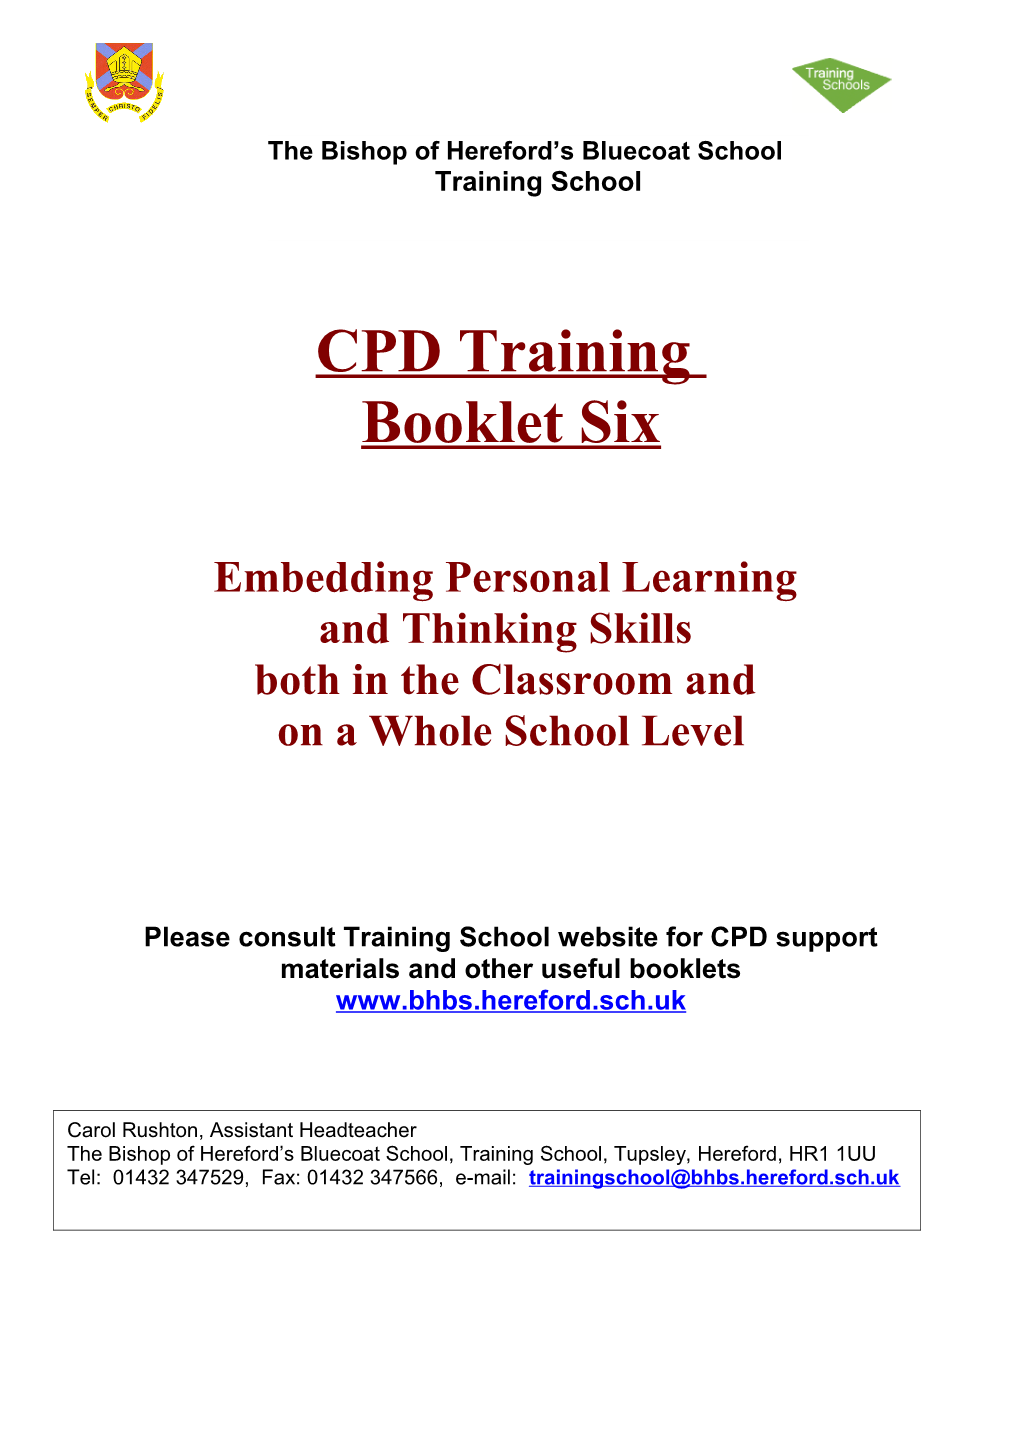 CPD Training Booklet Six